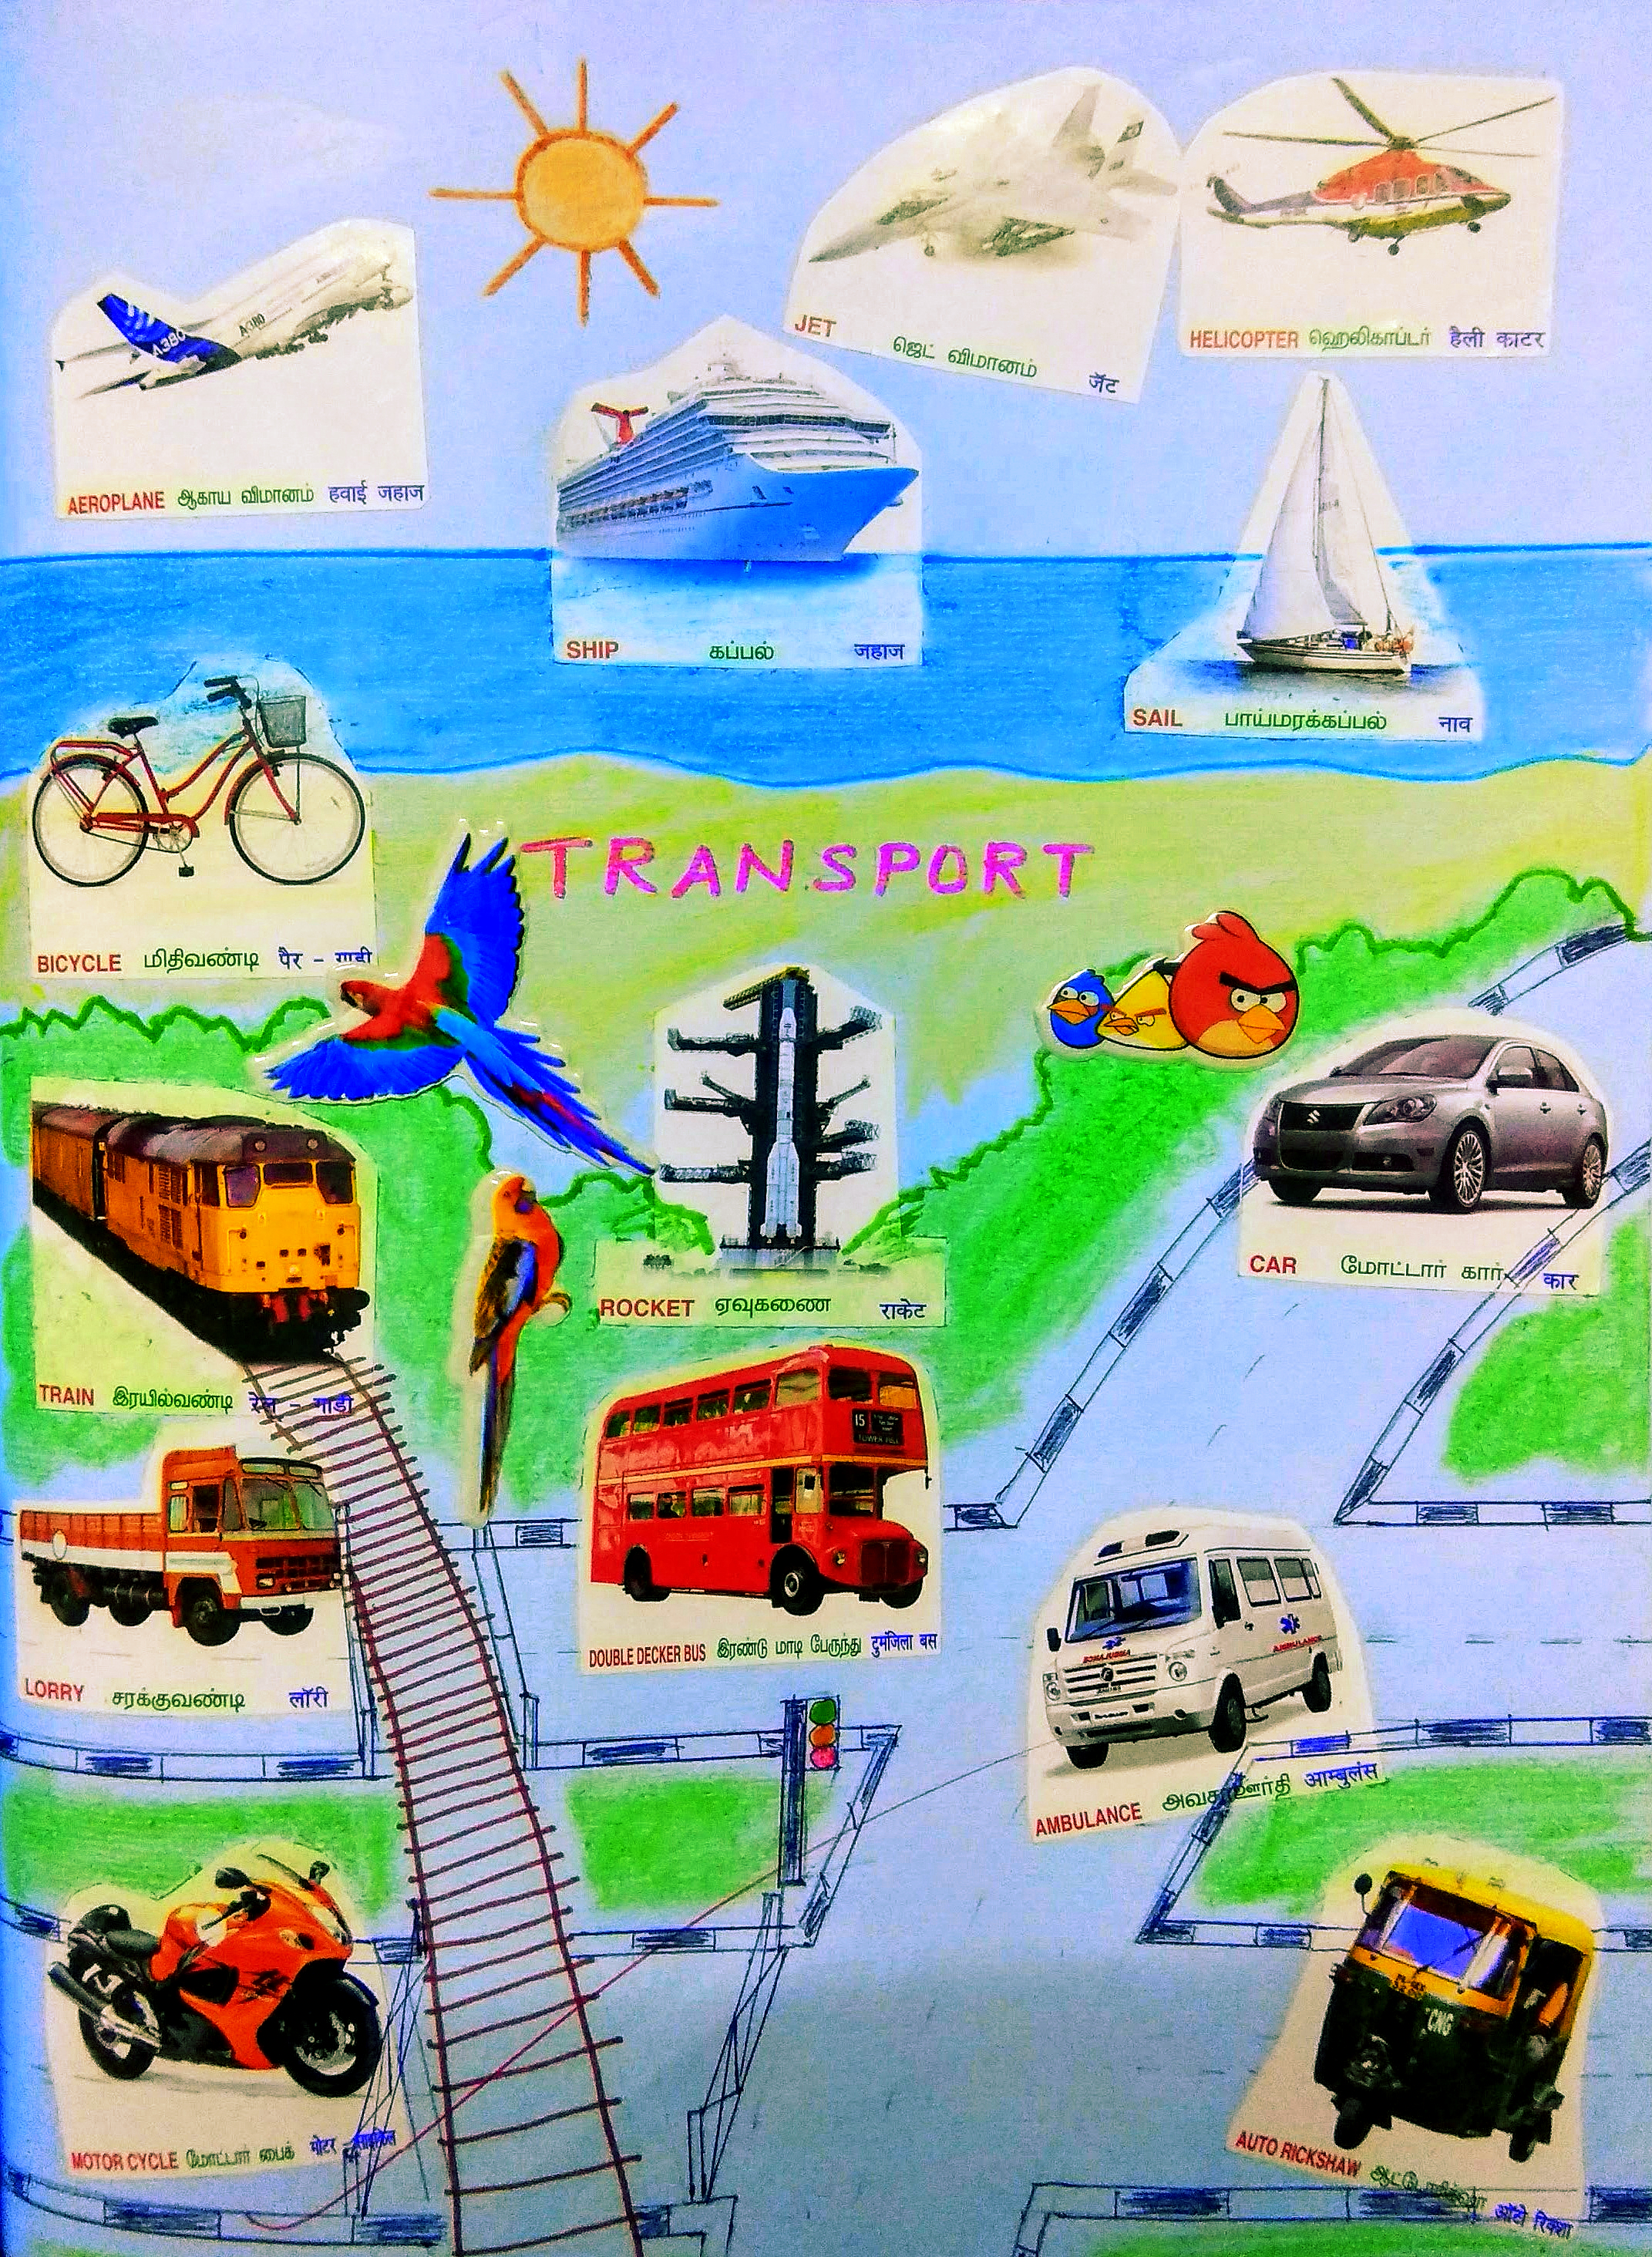 Transit To Dreamland - A picture of transportation and vehicles